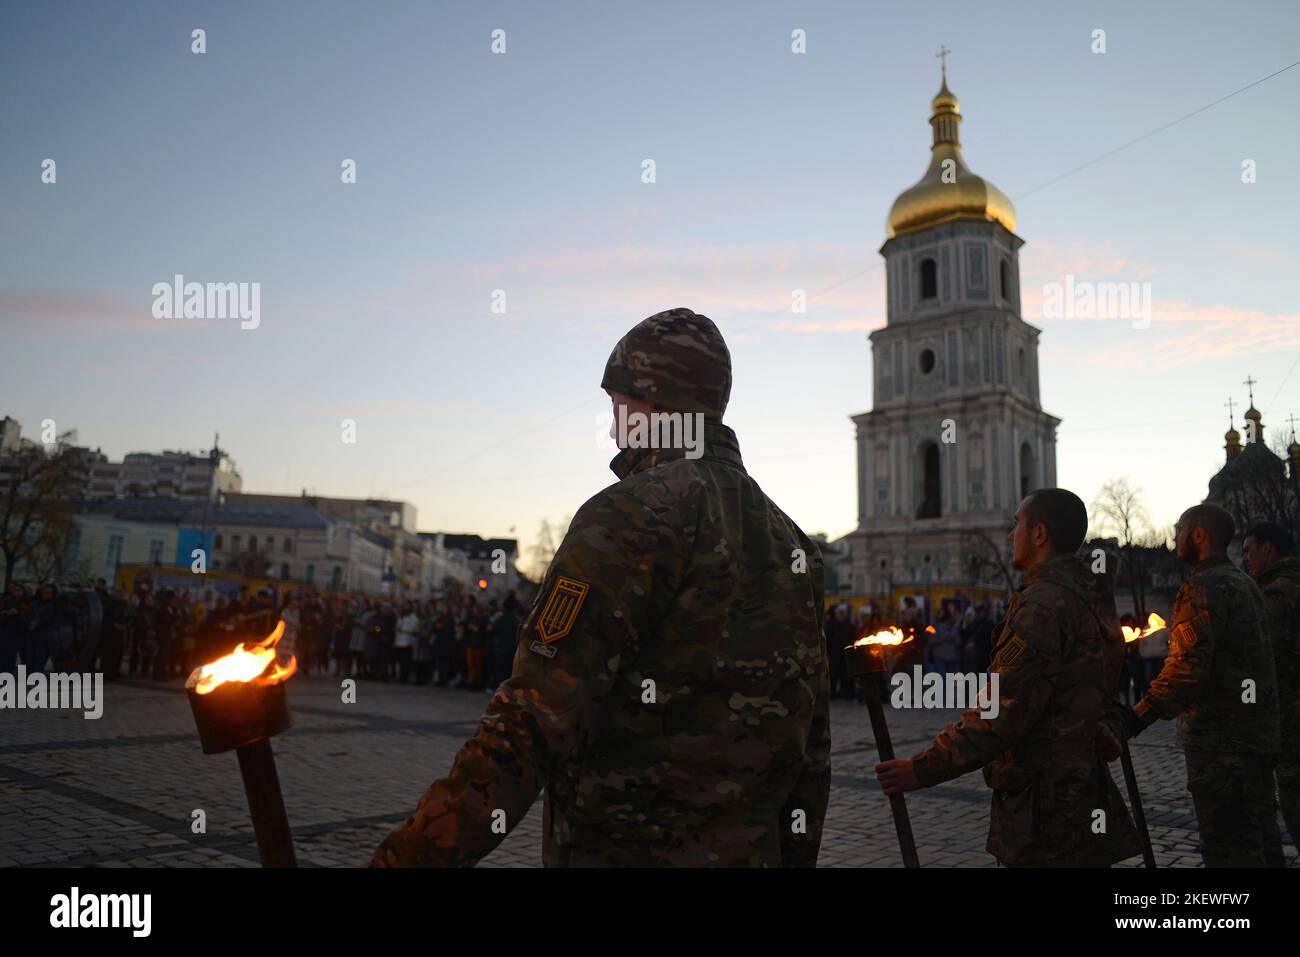 KYIV, UKRAINE - NOVEMBER 13, 2022 - Soldiers of Azov regiment hold burning torches to commemorate their fallen brothers in arms during the Heavenly Regiment of Azov mystery in Sofiyska Square, Kyiv, capital of Ukraine. Stock Photo